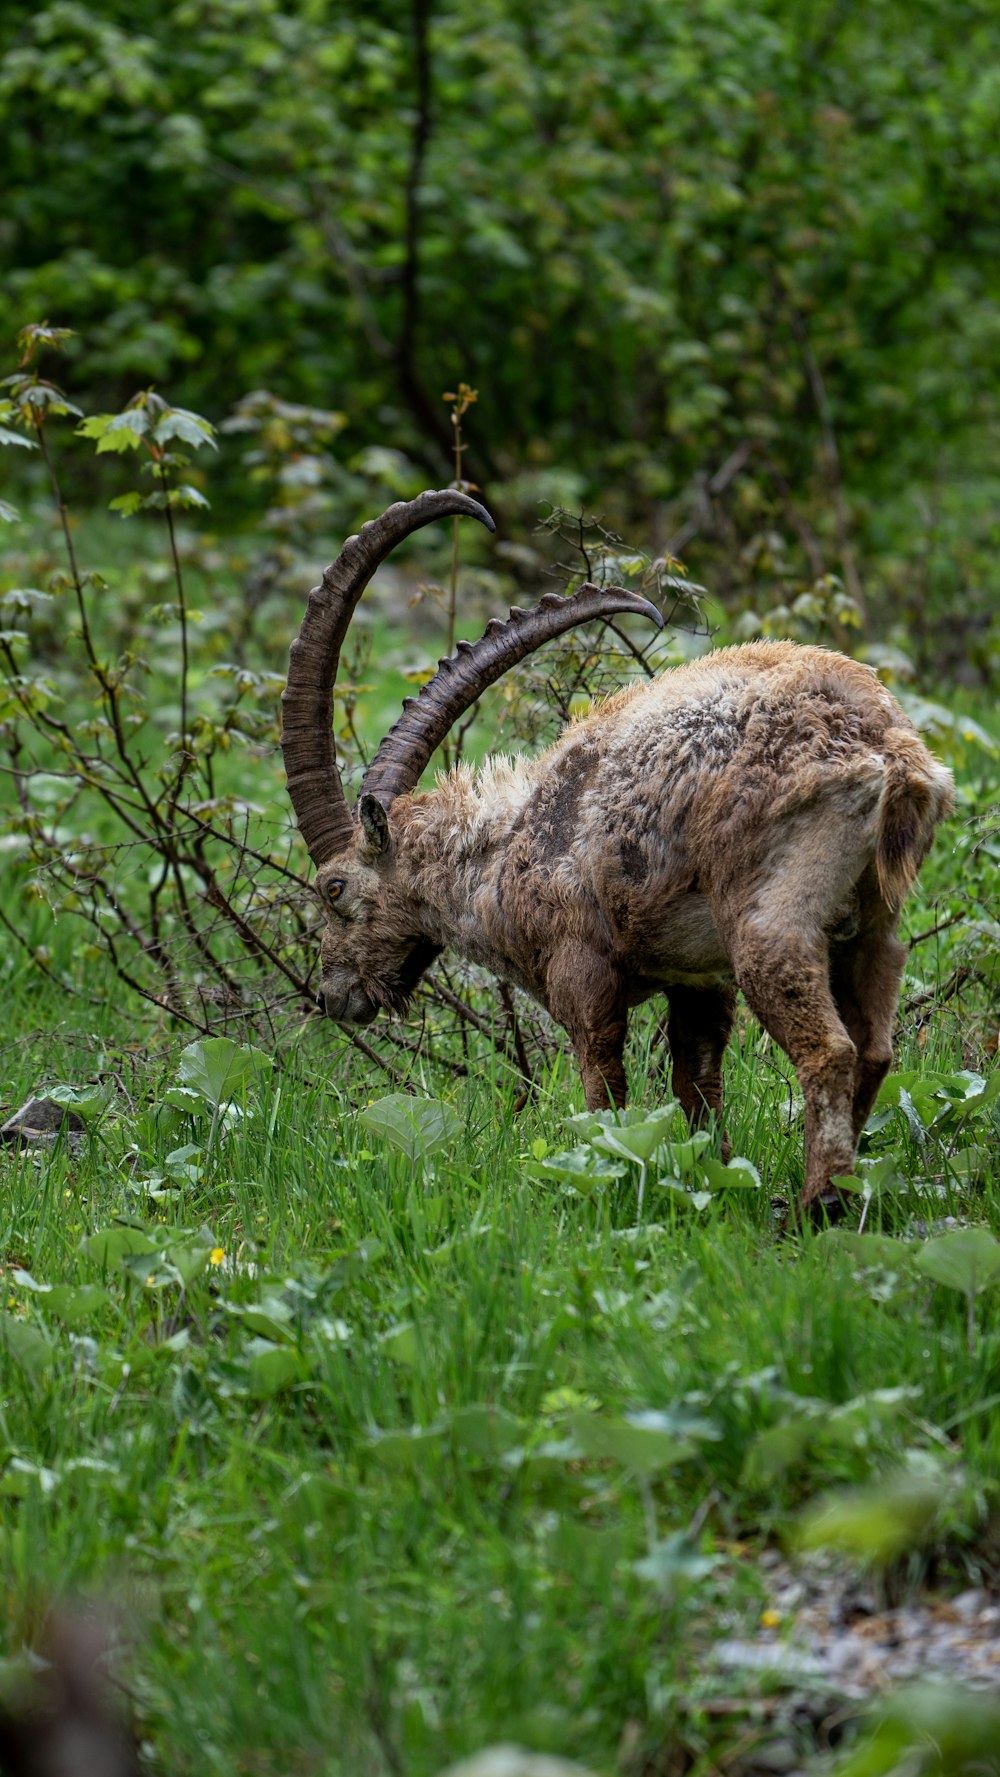 a horned animal grazing in a field of grass